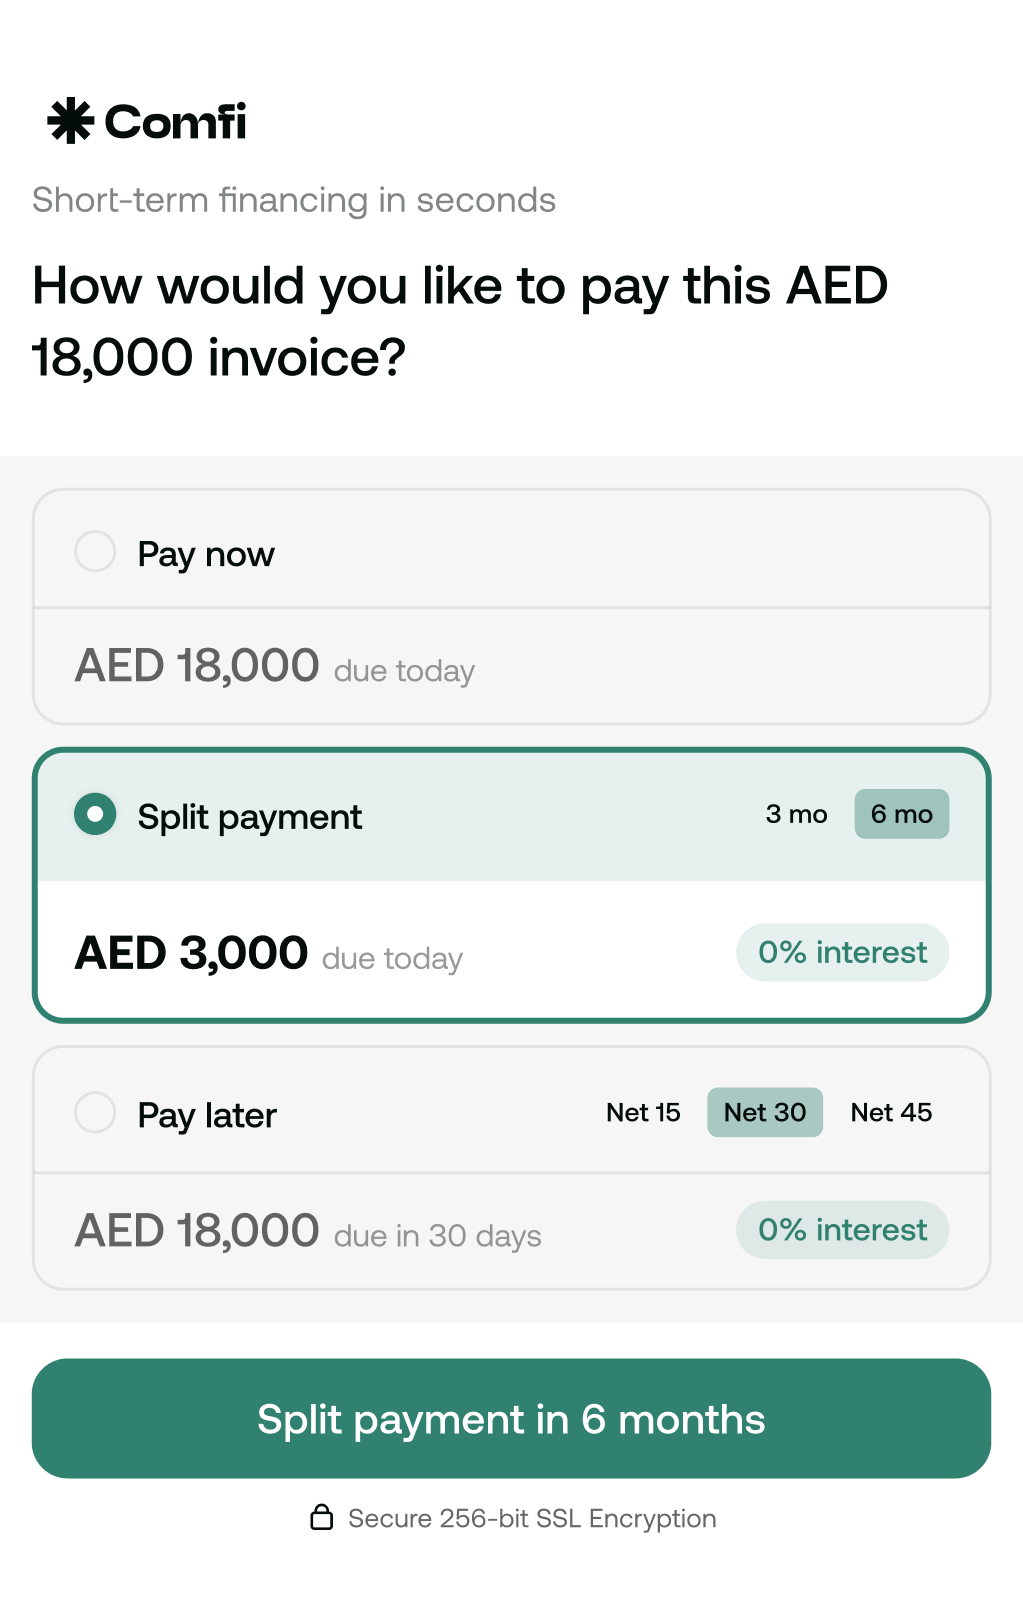 Would you like to pay this AED 18,000.00 invoice?